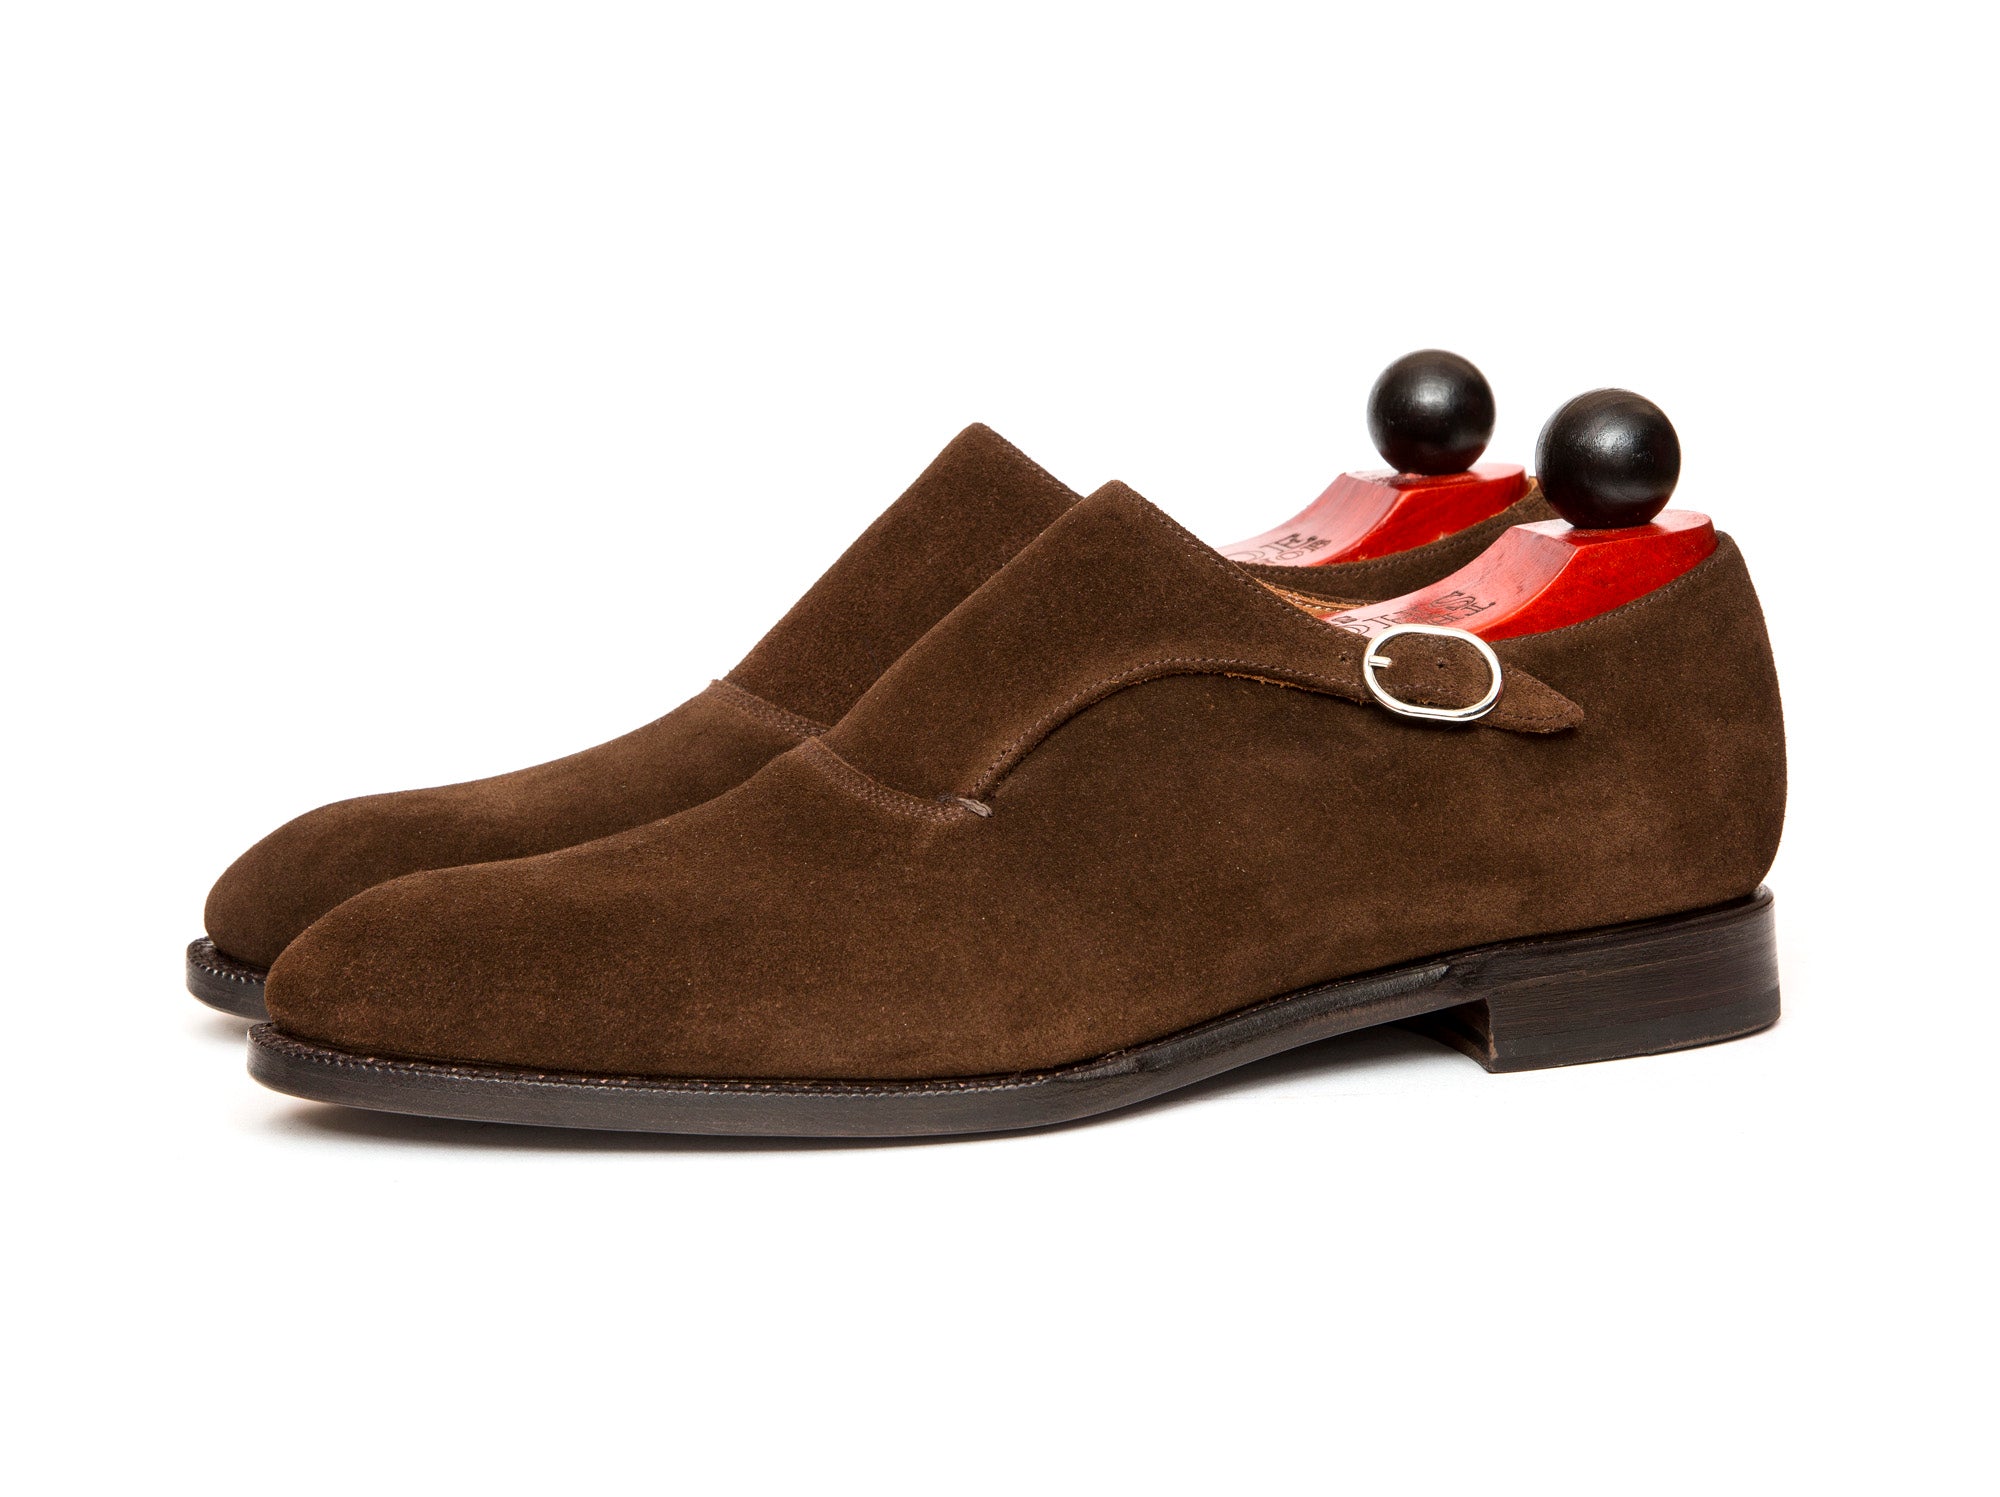 Madrona - MTO - Dark Brown Suede - NGT Last - Single Leather Sole